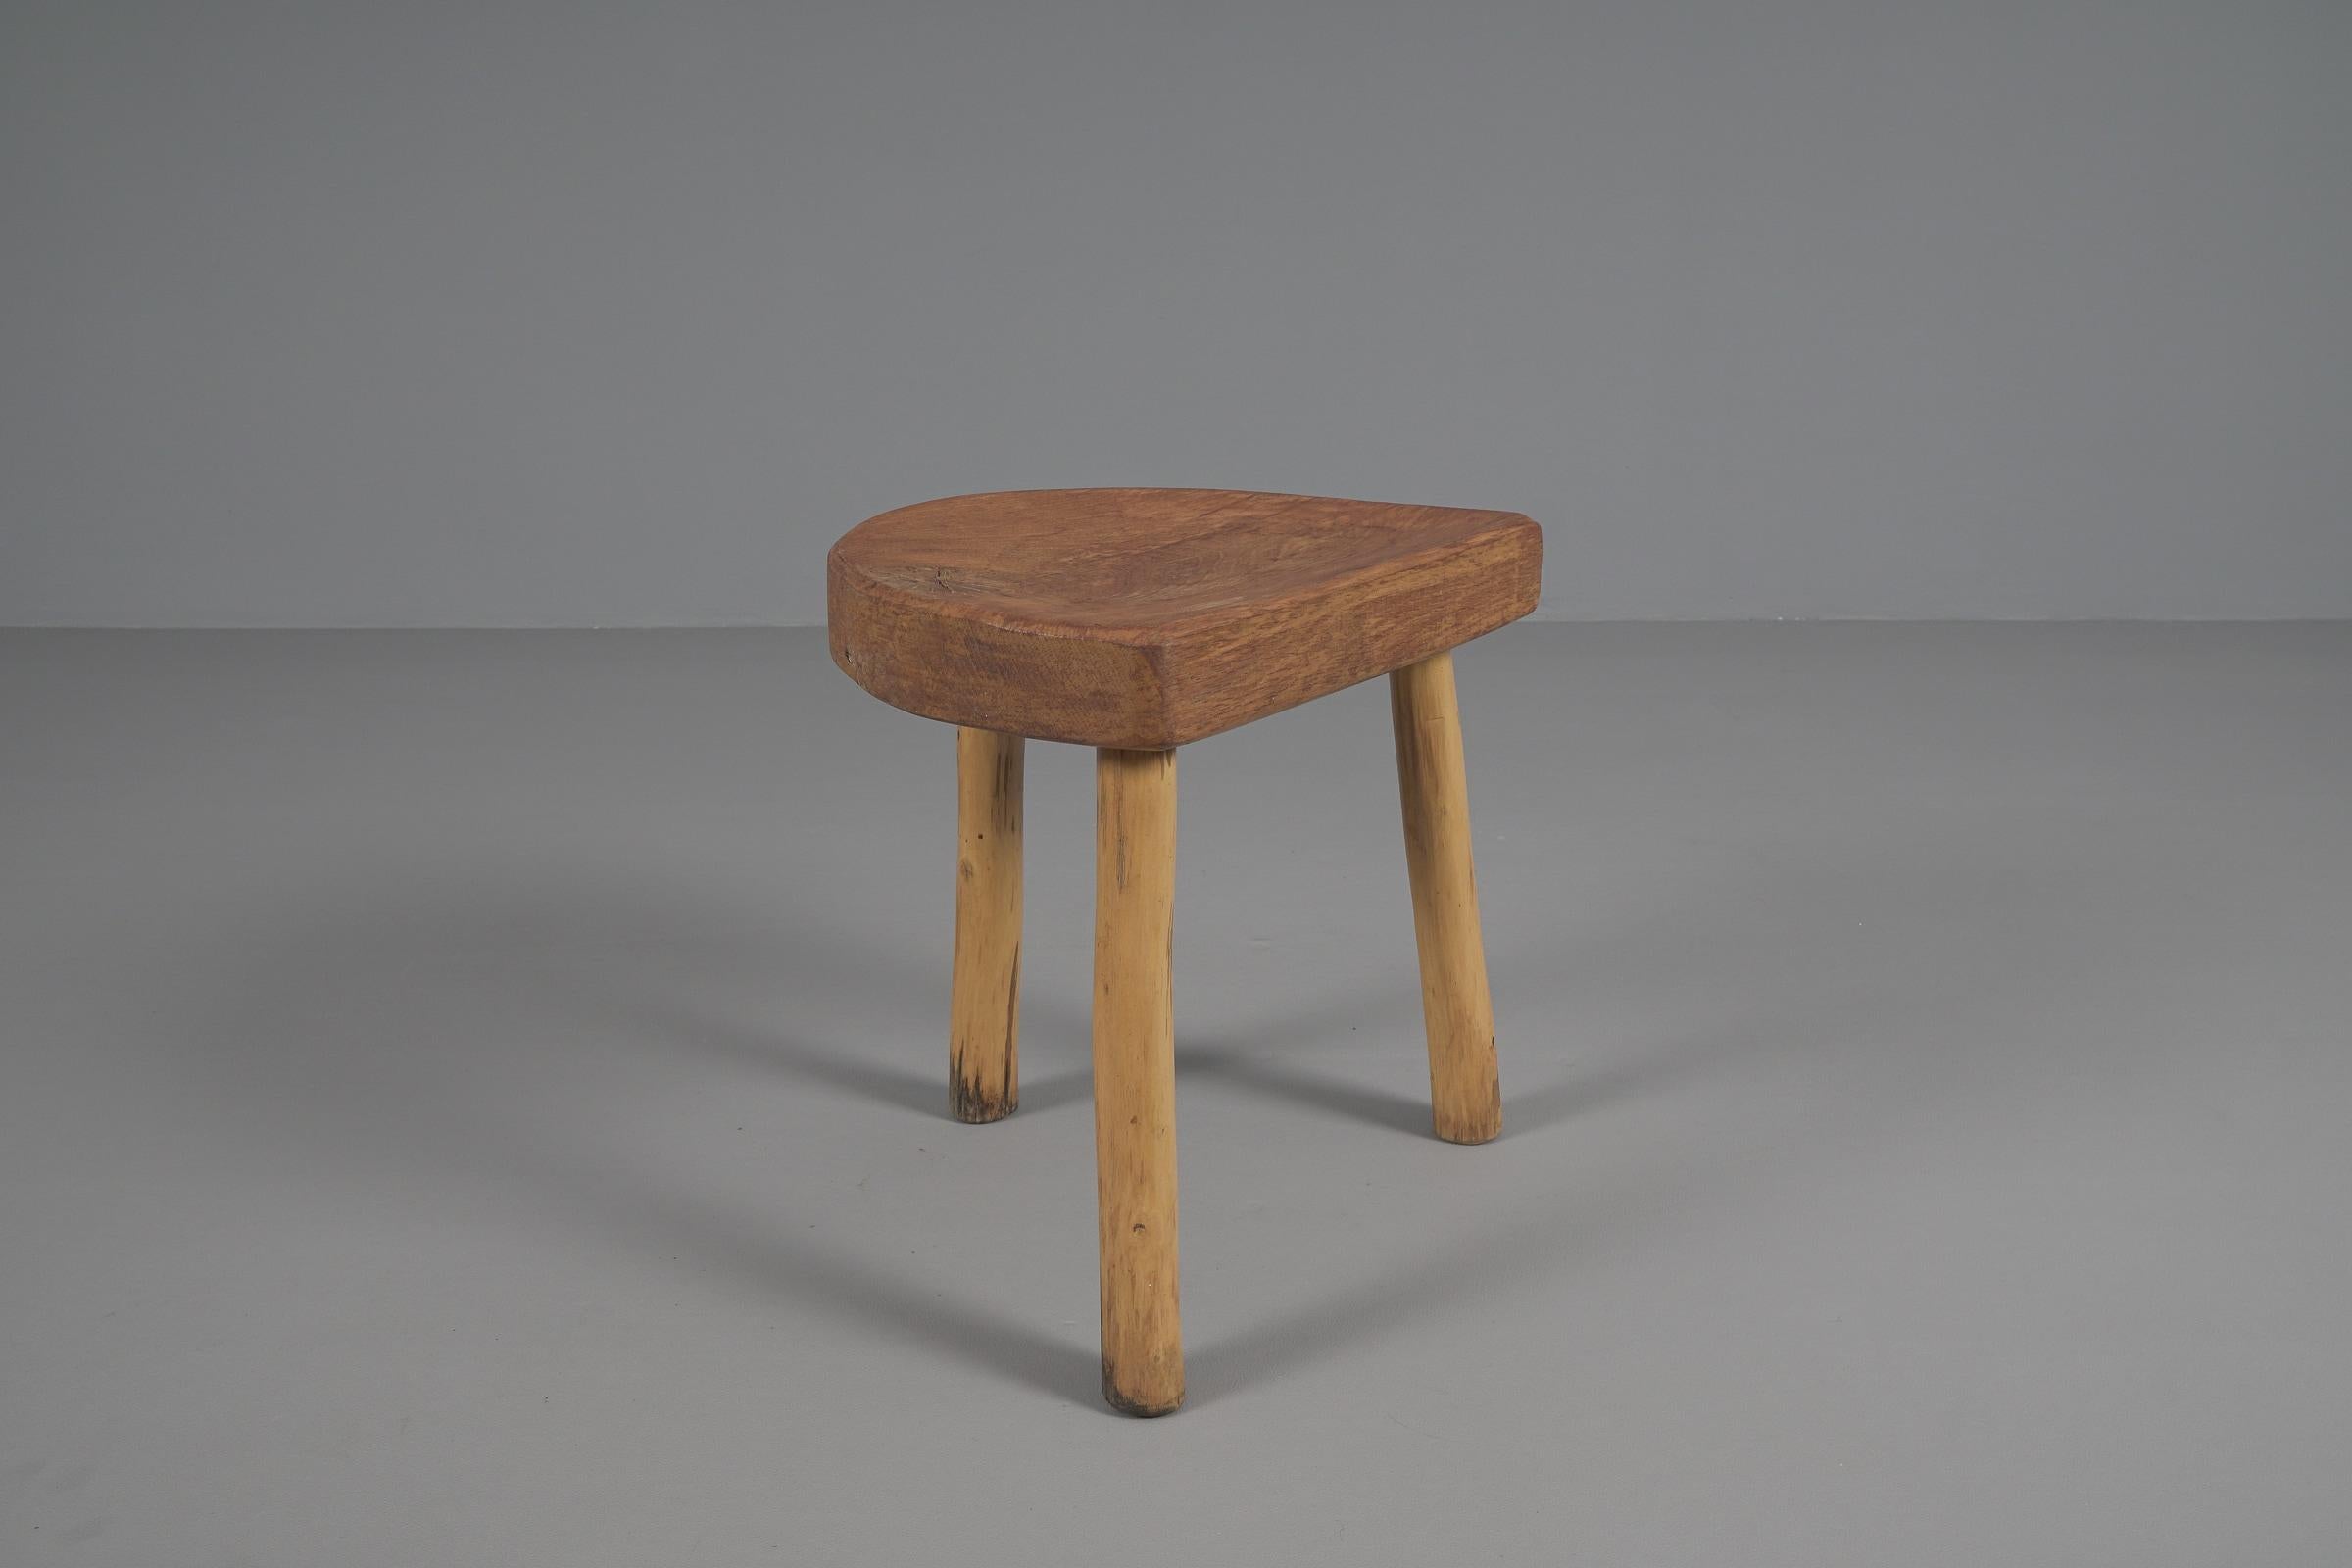 French Provincial Mid-Century Modern Massive Oak Stool, 1960s, France For Sale